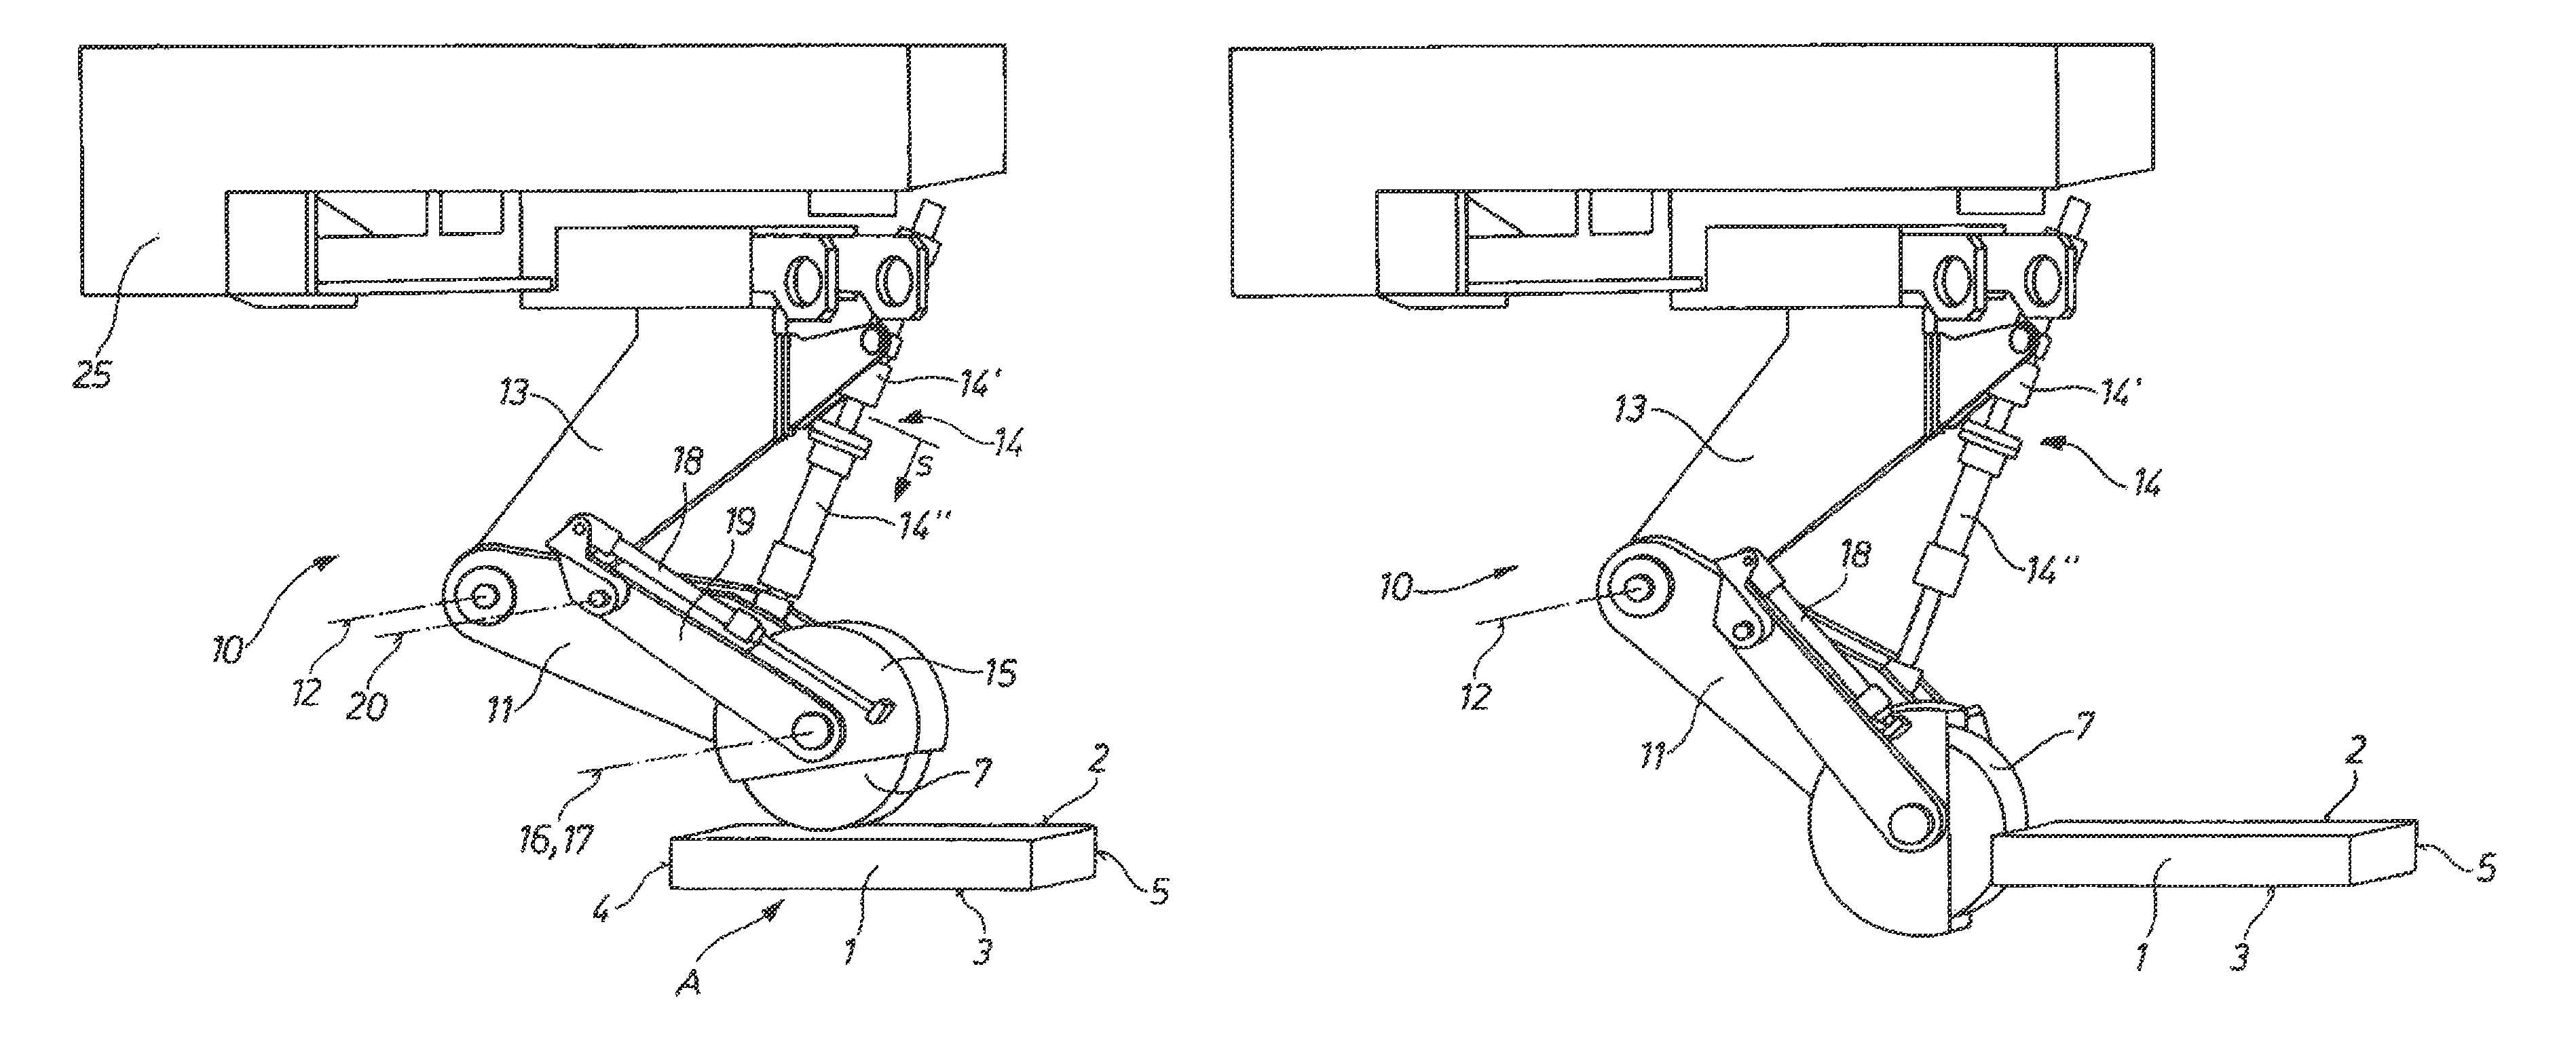 Method and apparatus for grinding a continuously casting product